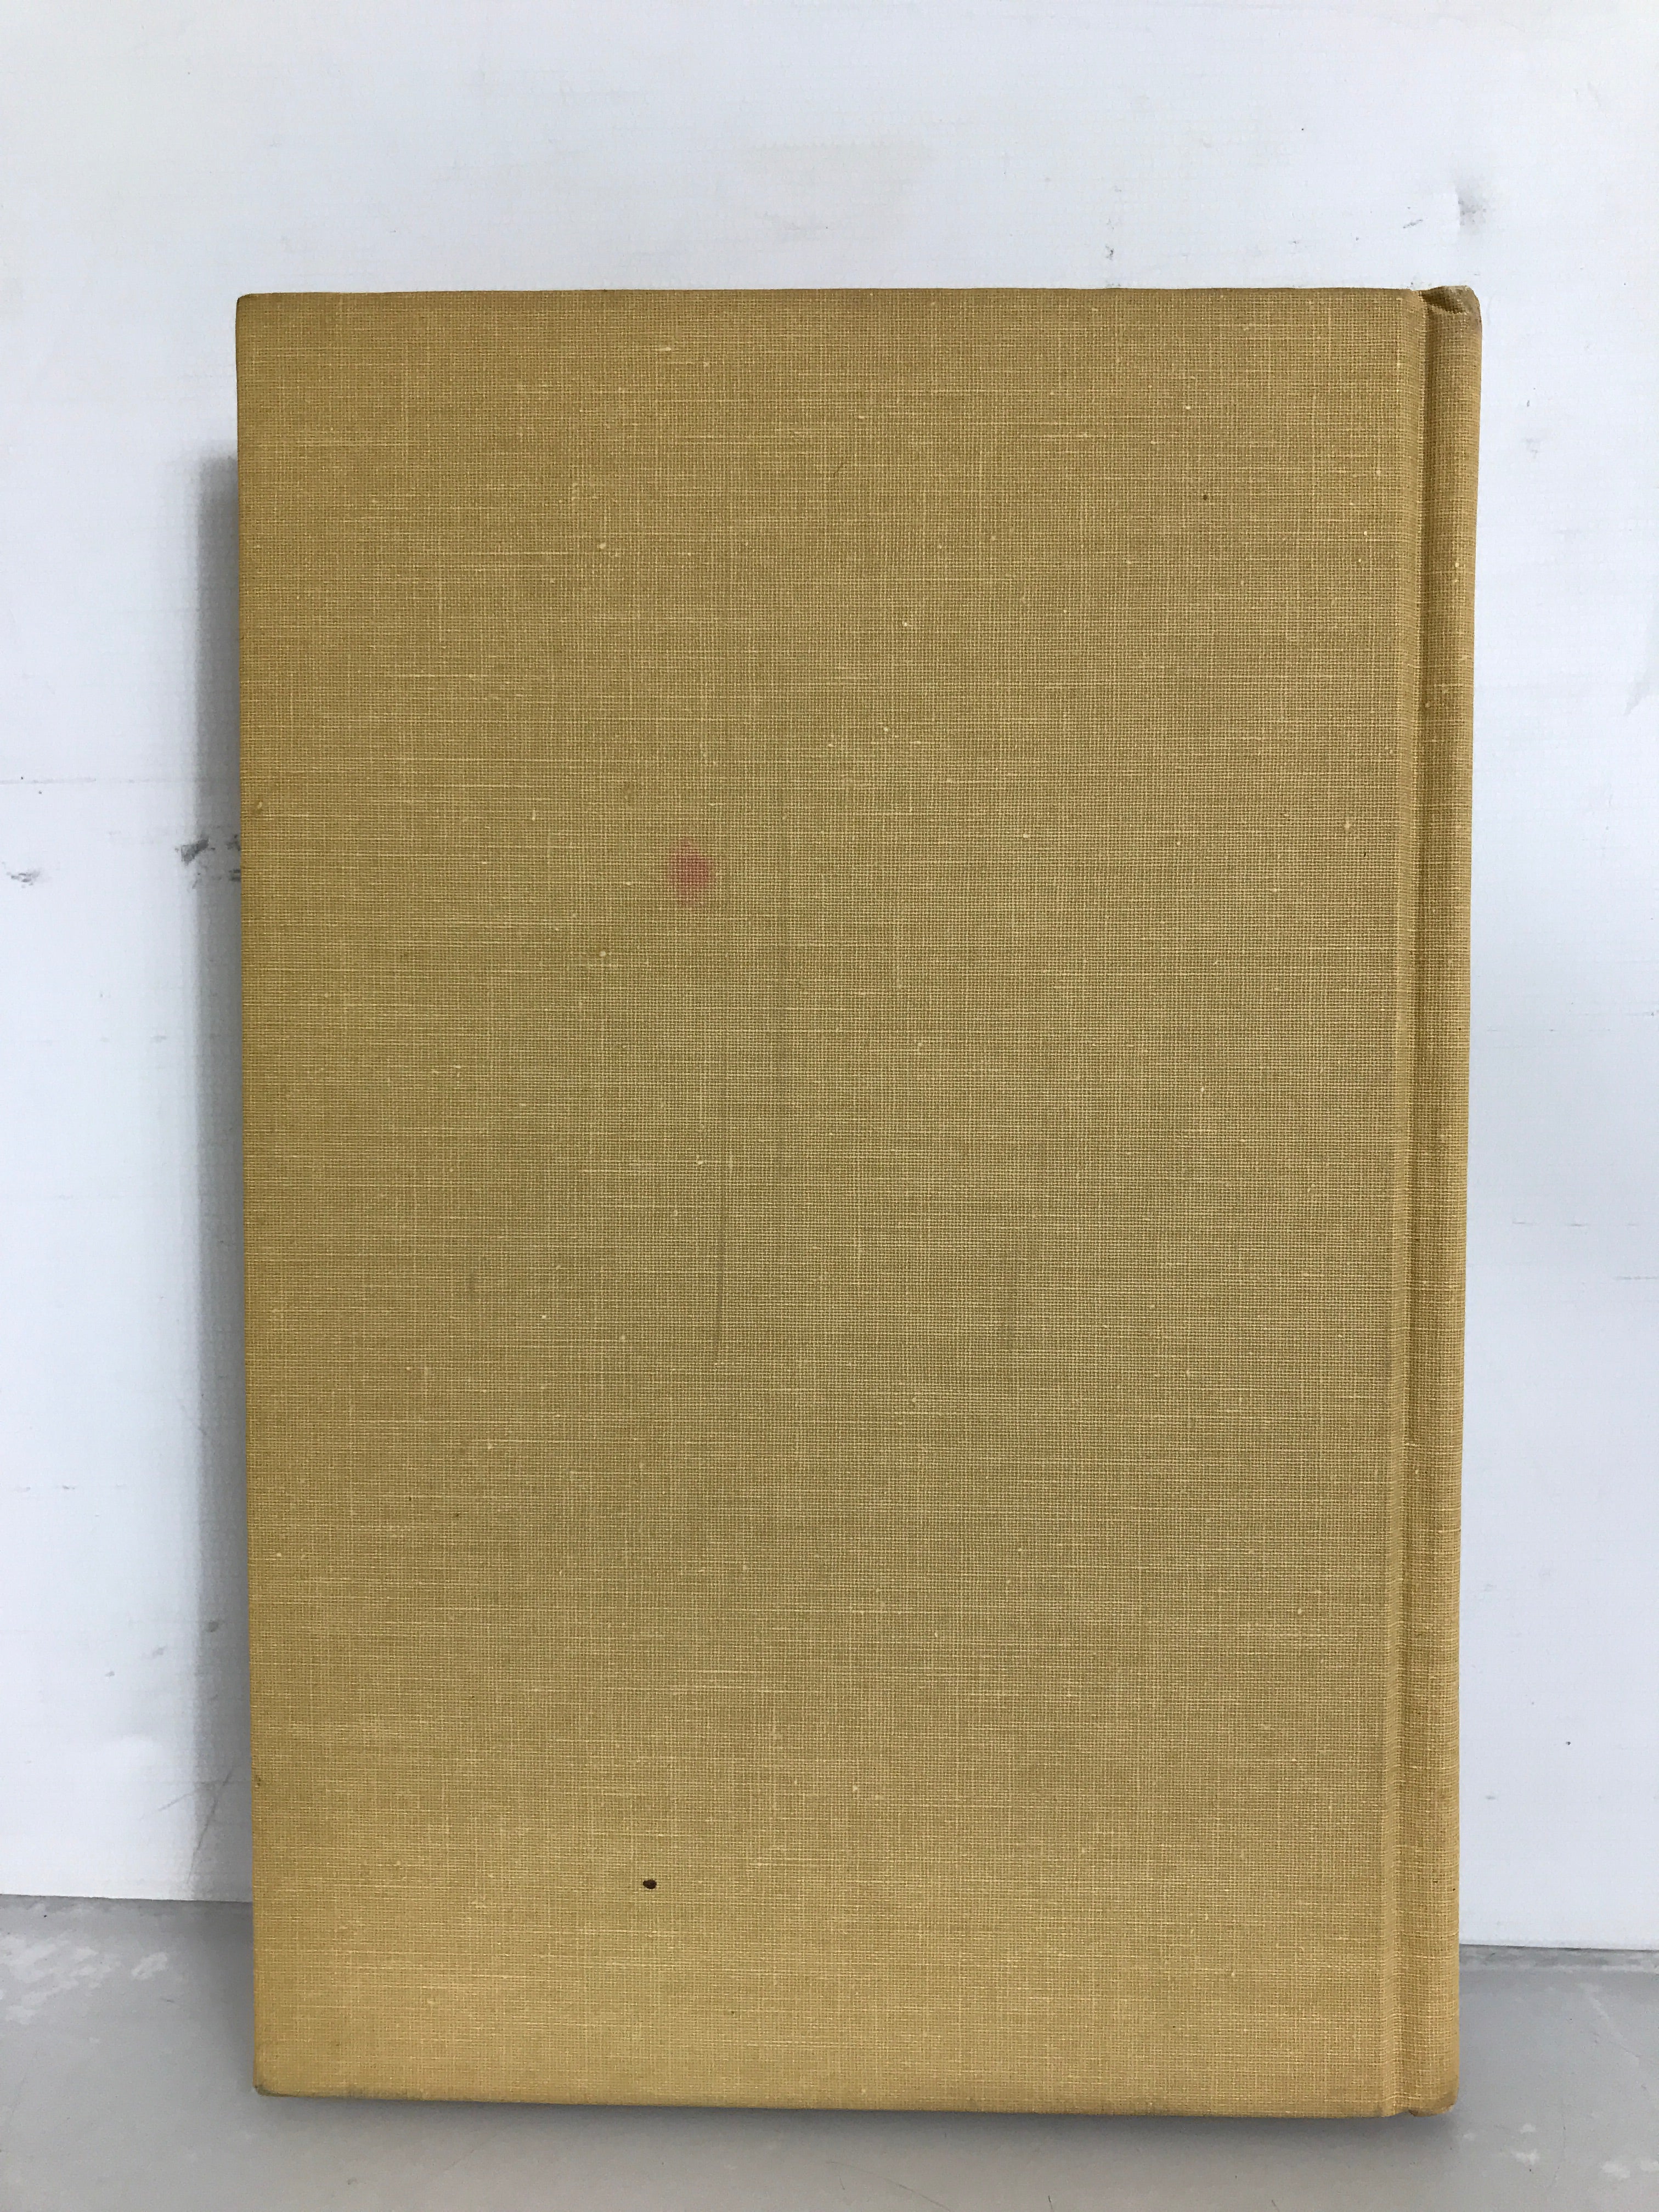 Of Predation and Life by Paul Errington First Edition 1967 HC DJ